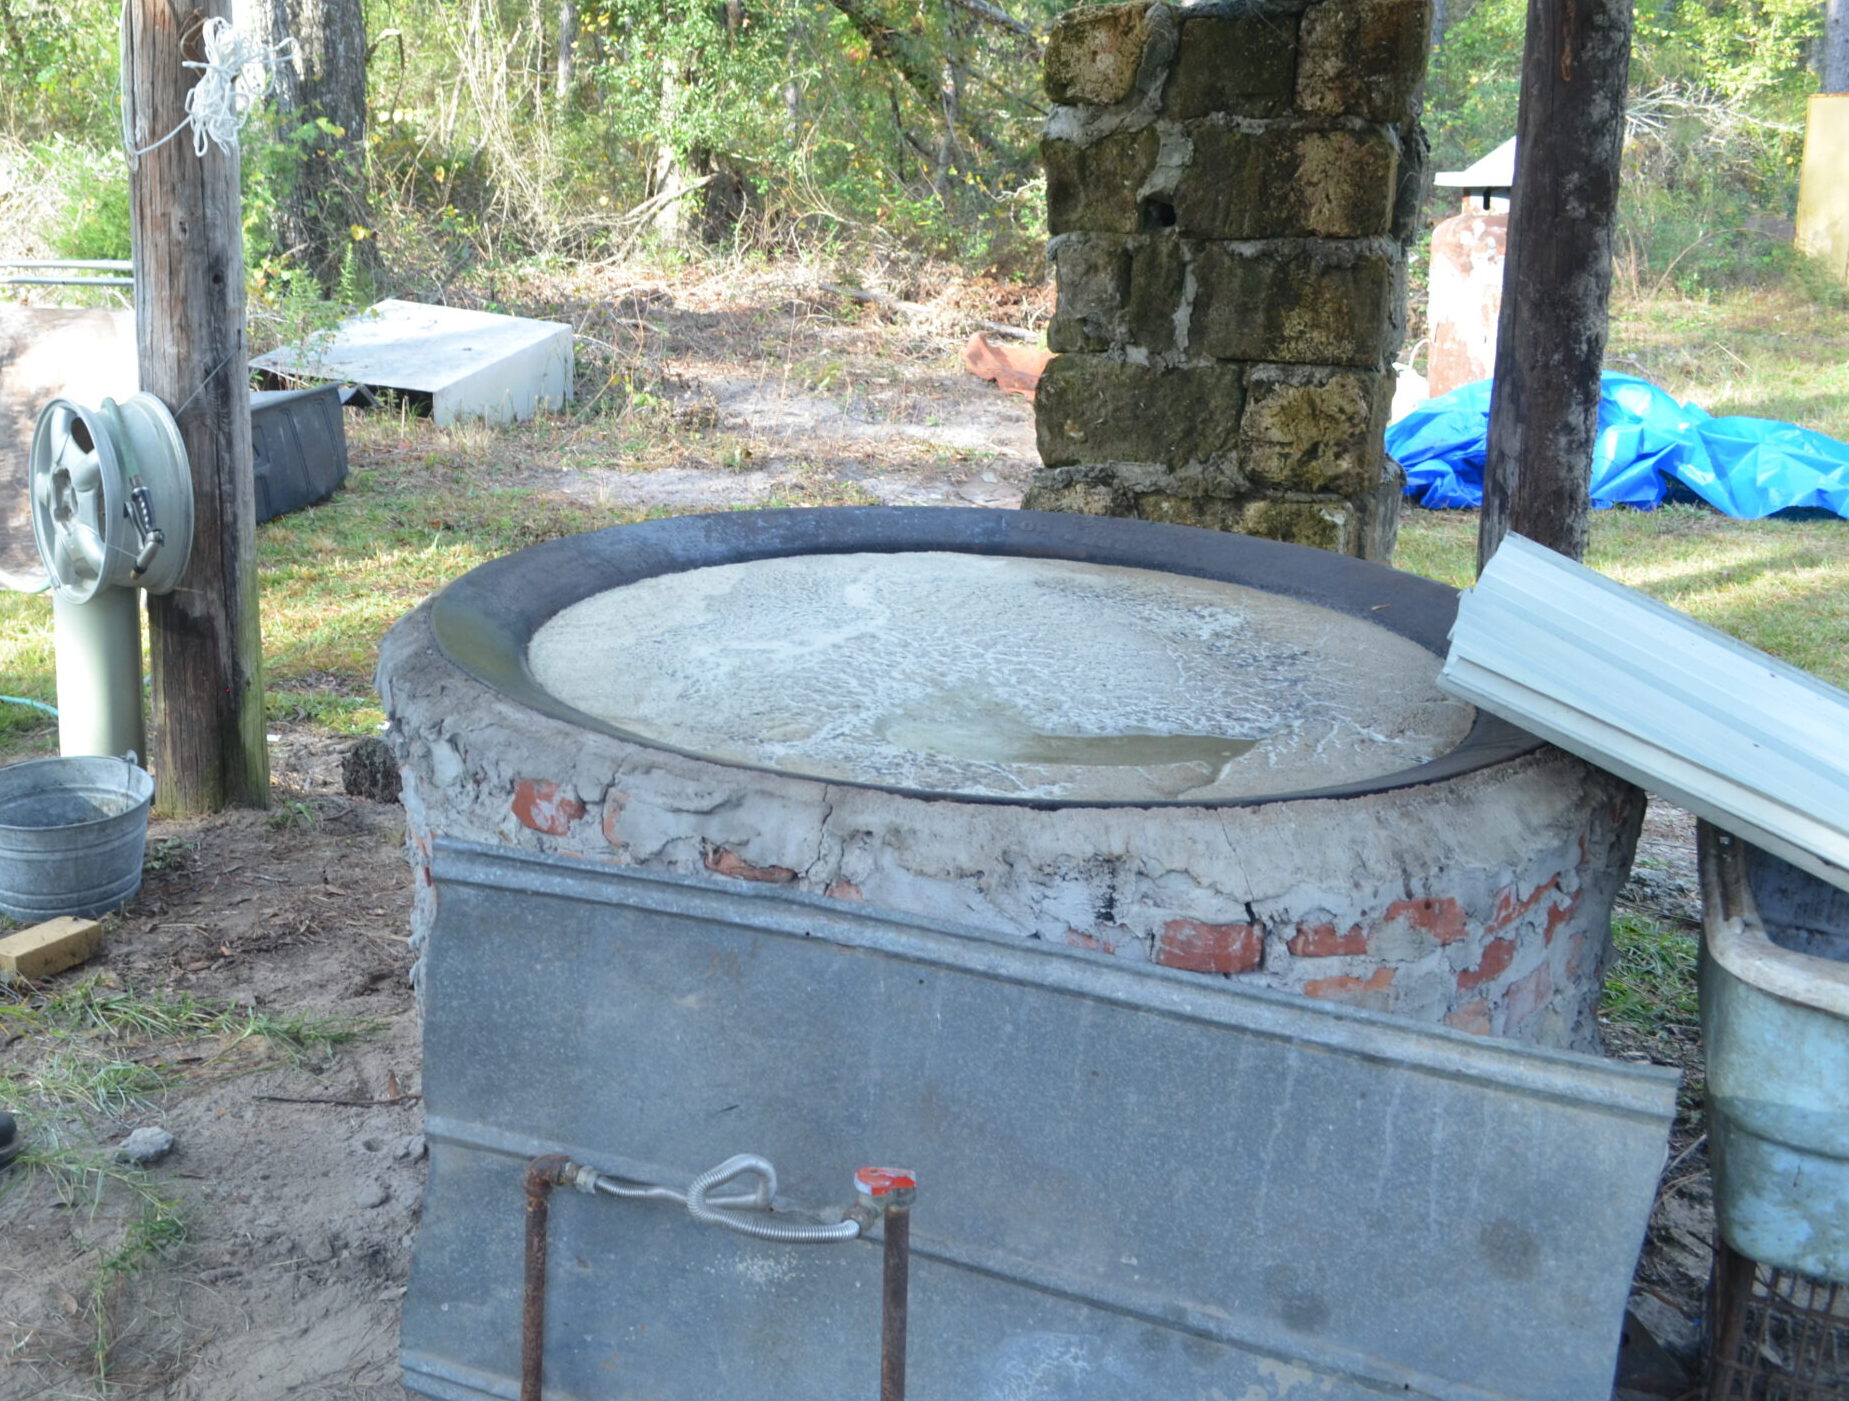 The cast iron boiler at Renaissance Park used to make cane sugar syrup.